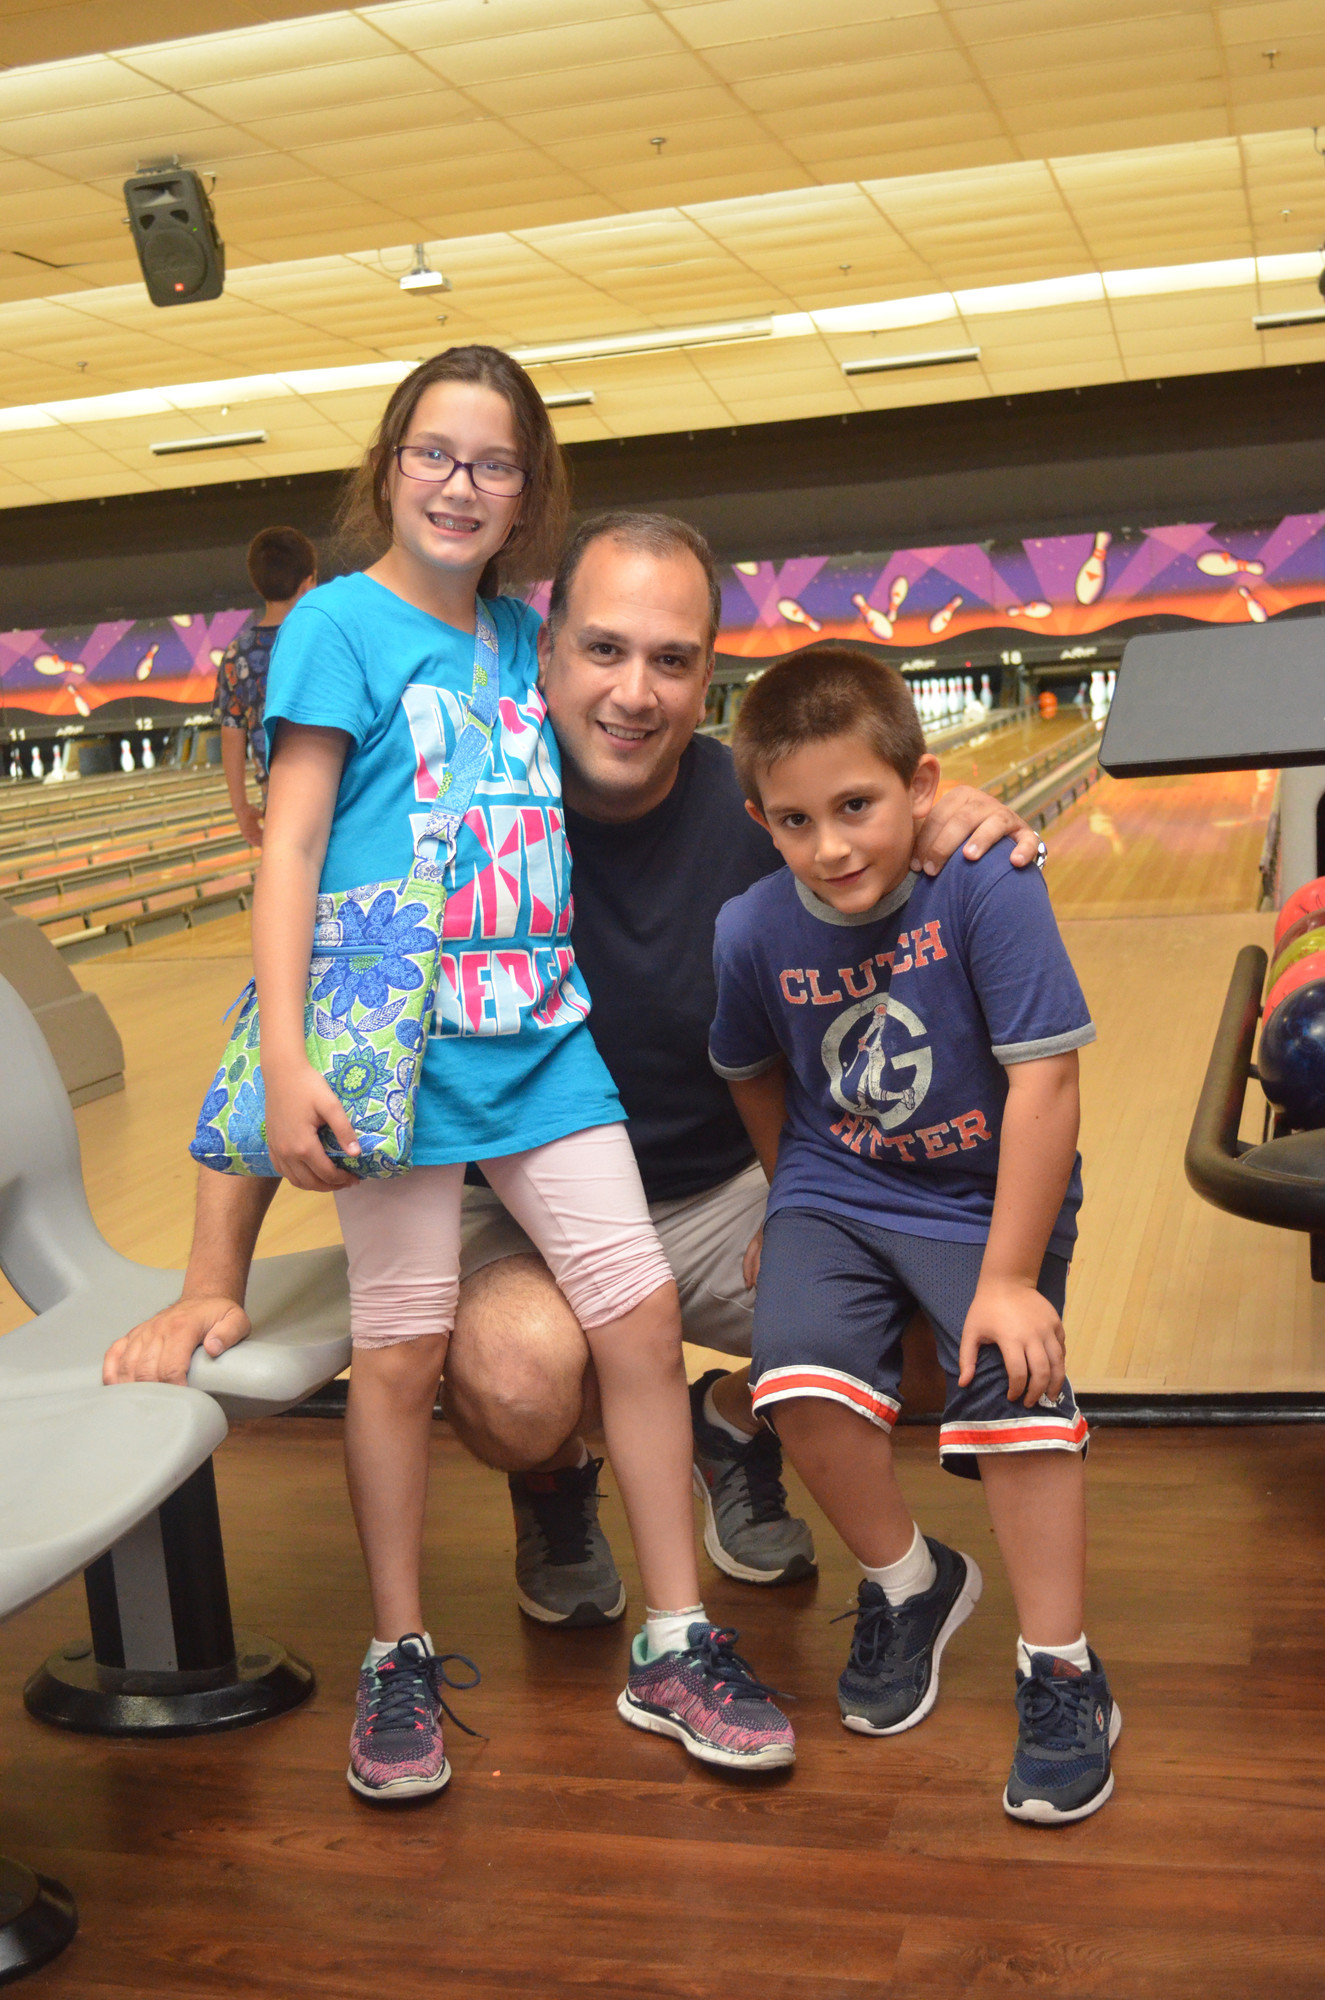 Richard Bellocco with his kids, Sophia, 9, and Michael, 6.